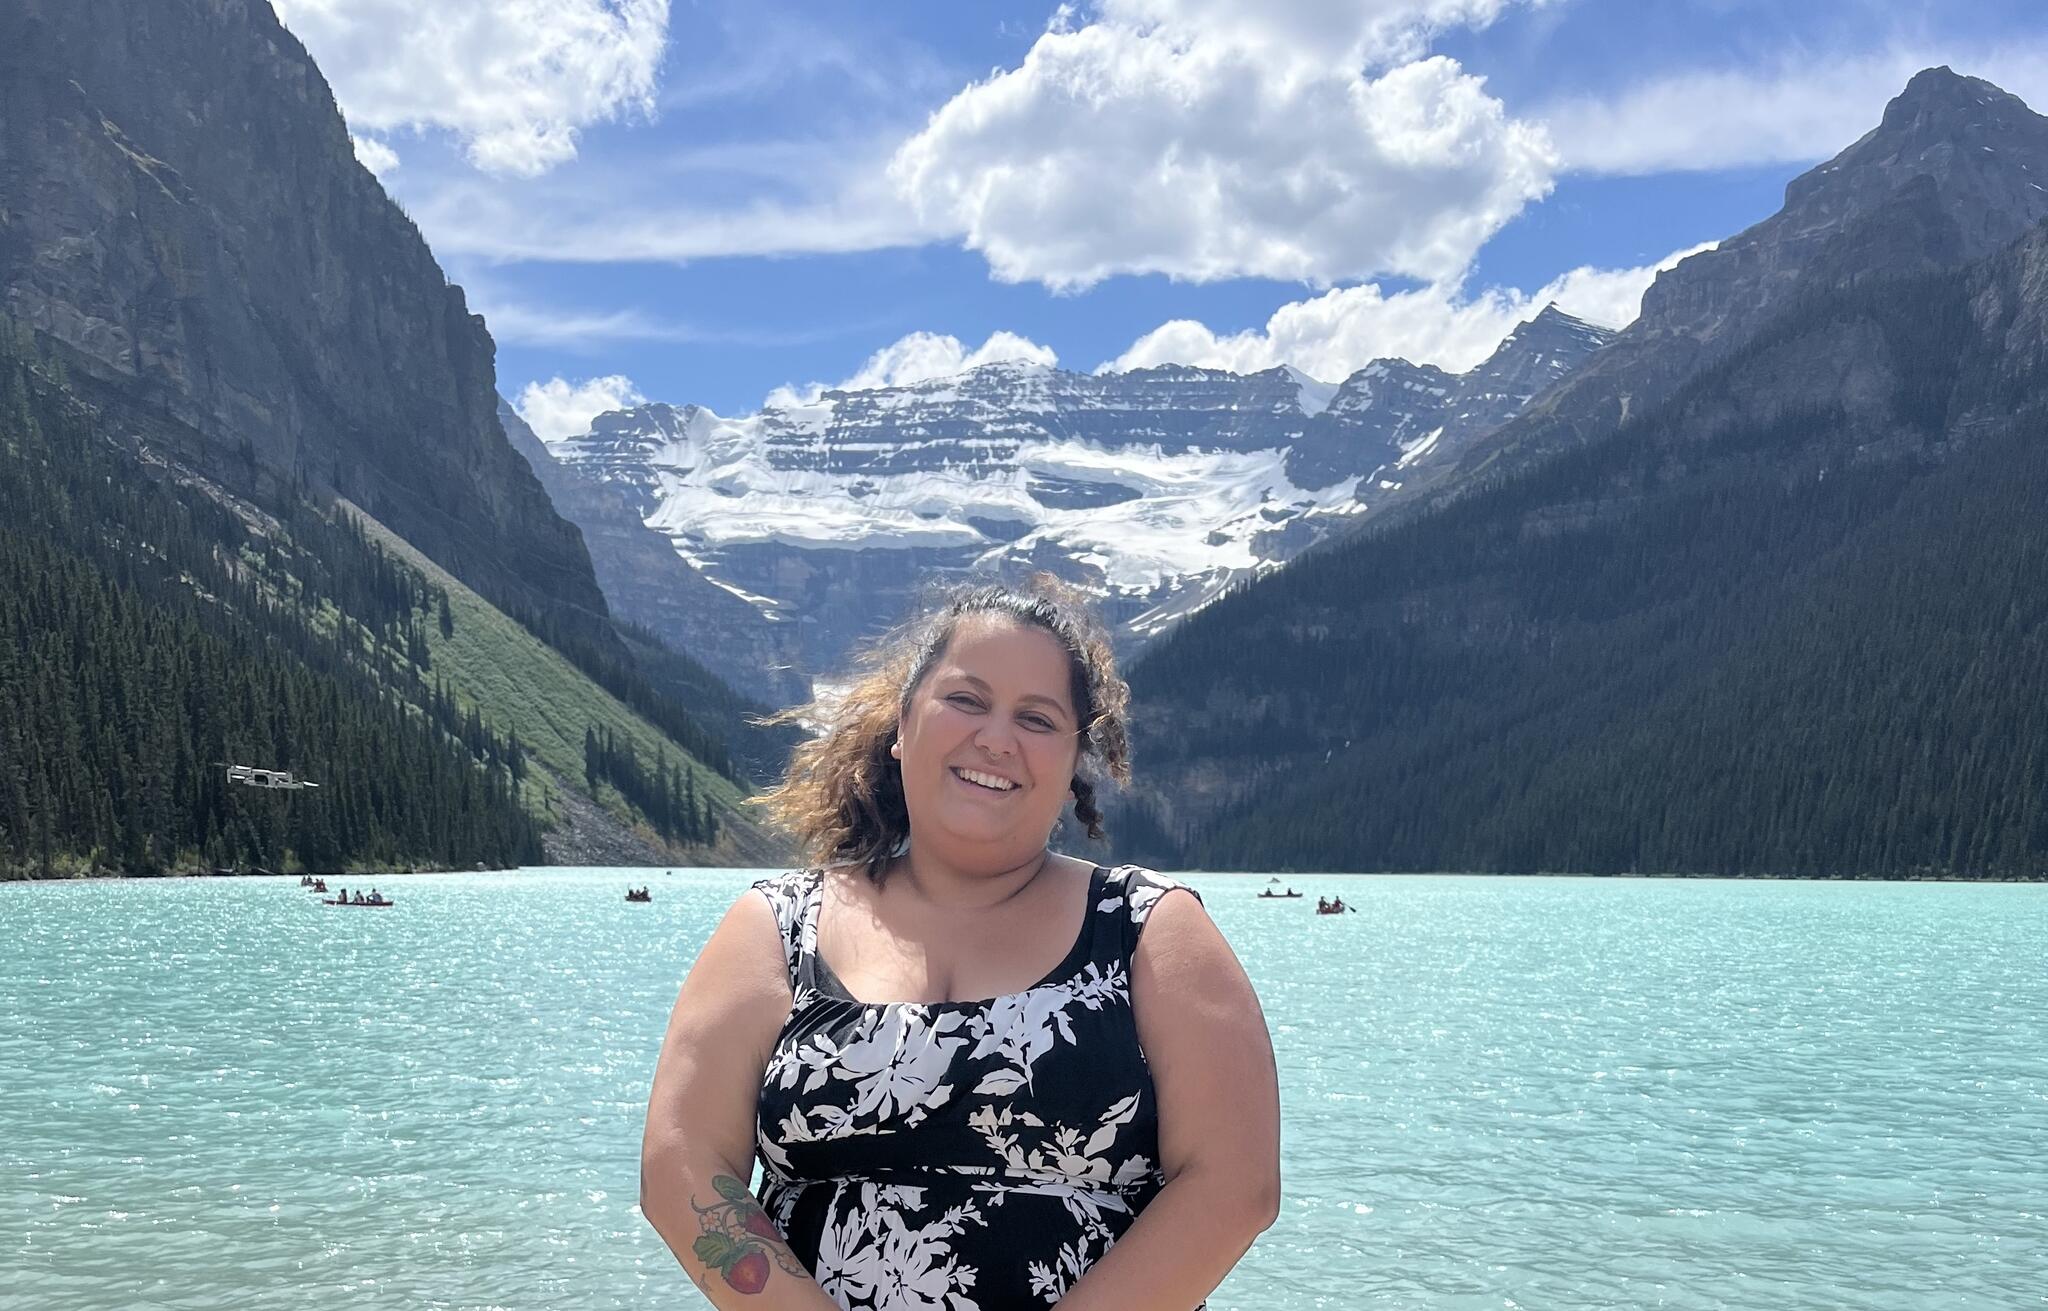 A woman in a black and white floral dress smiles at the camera in front of crystal blue water and tall mountains